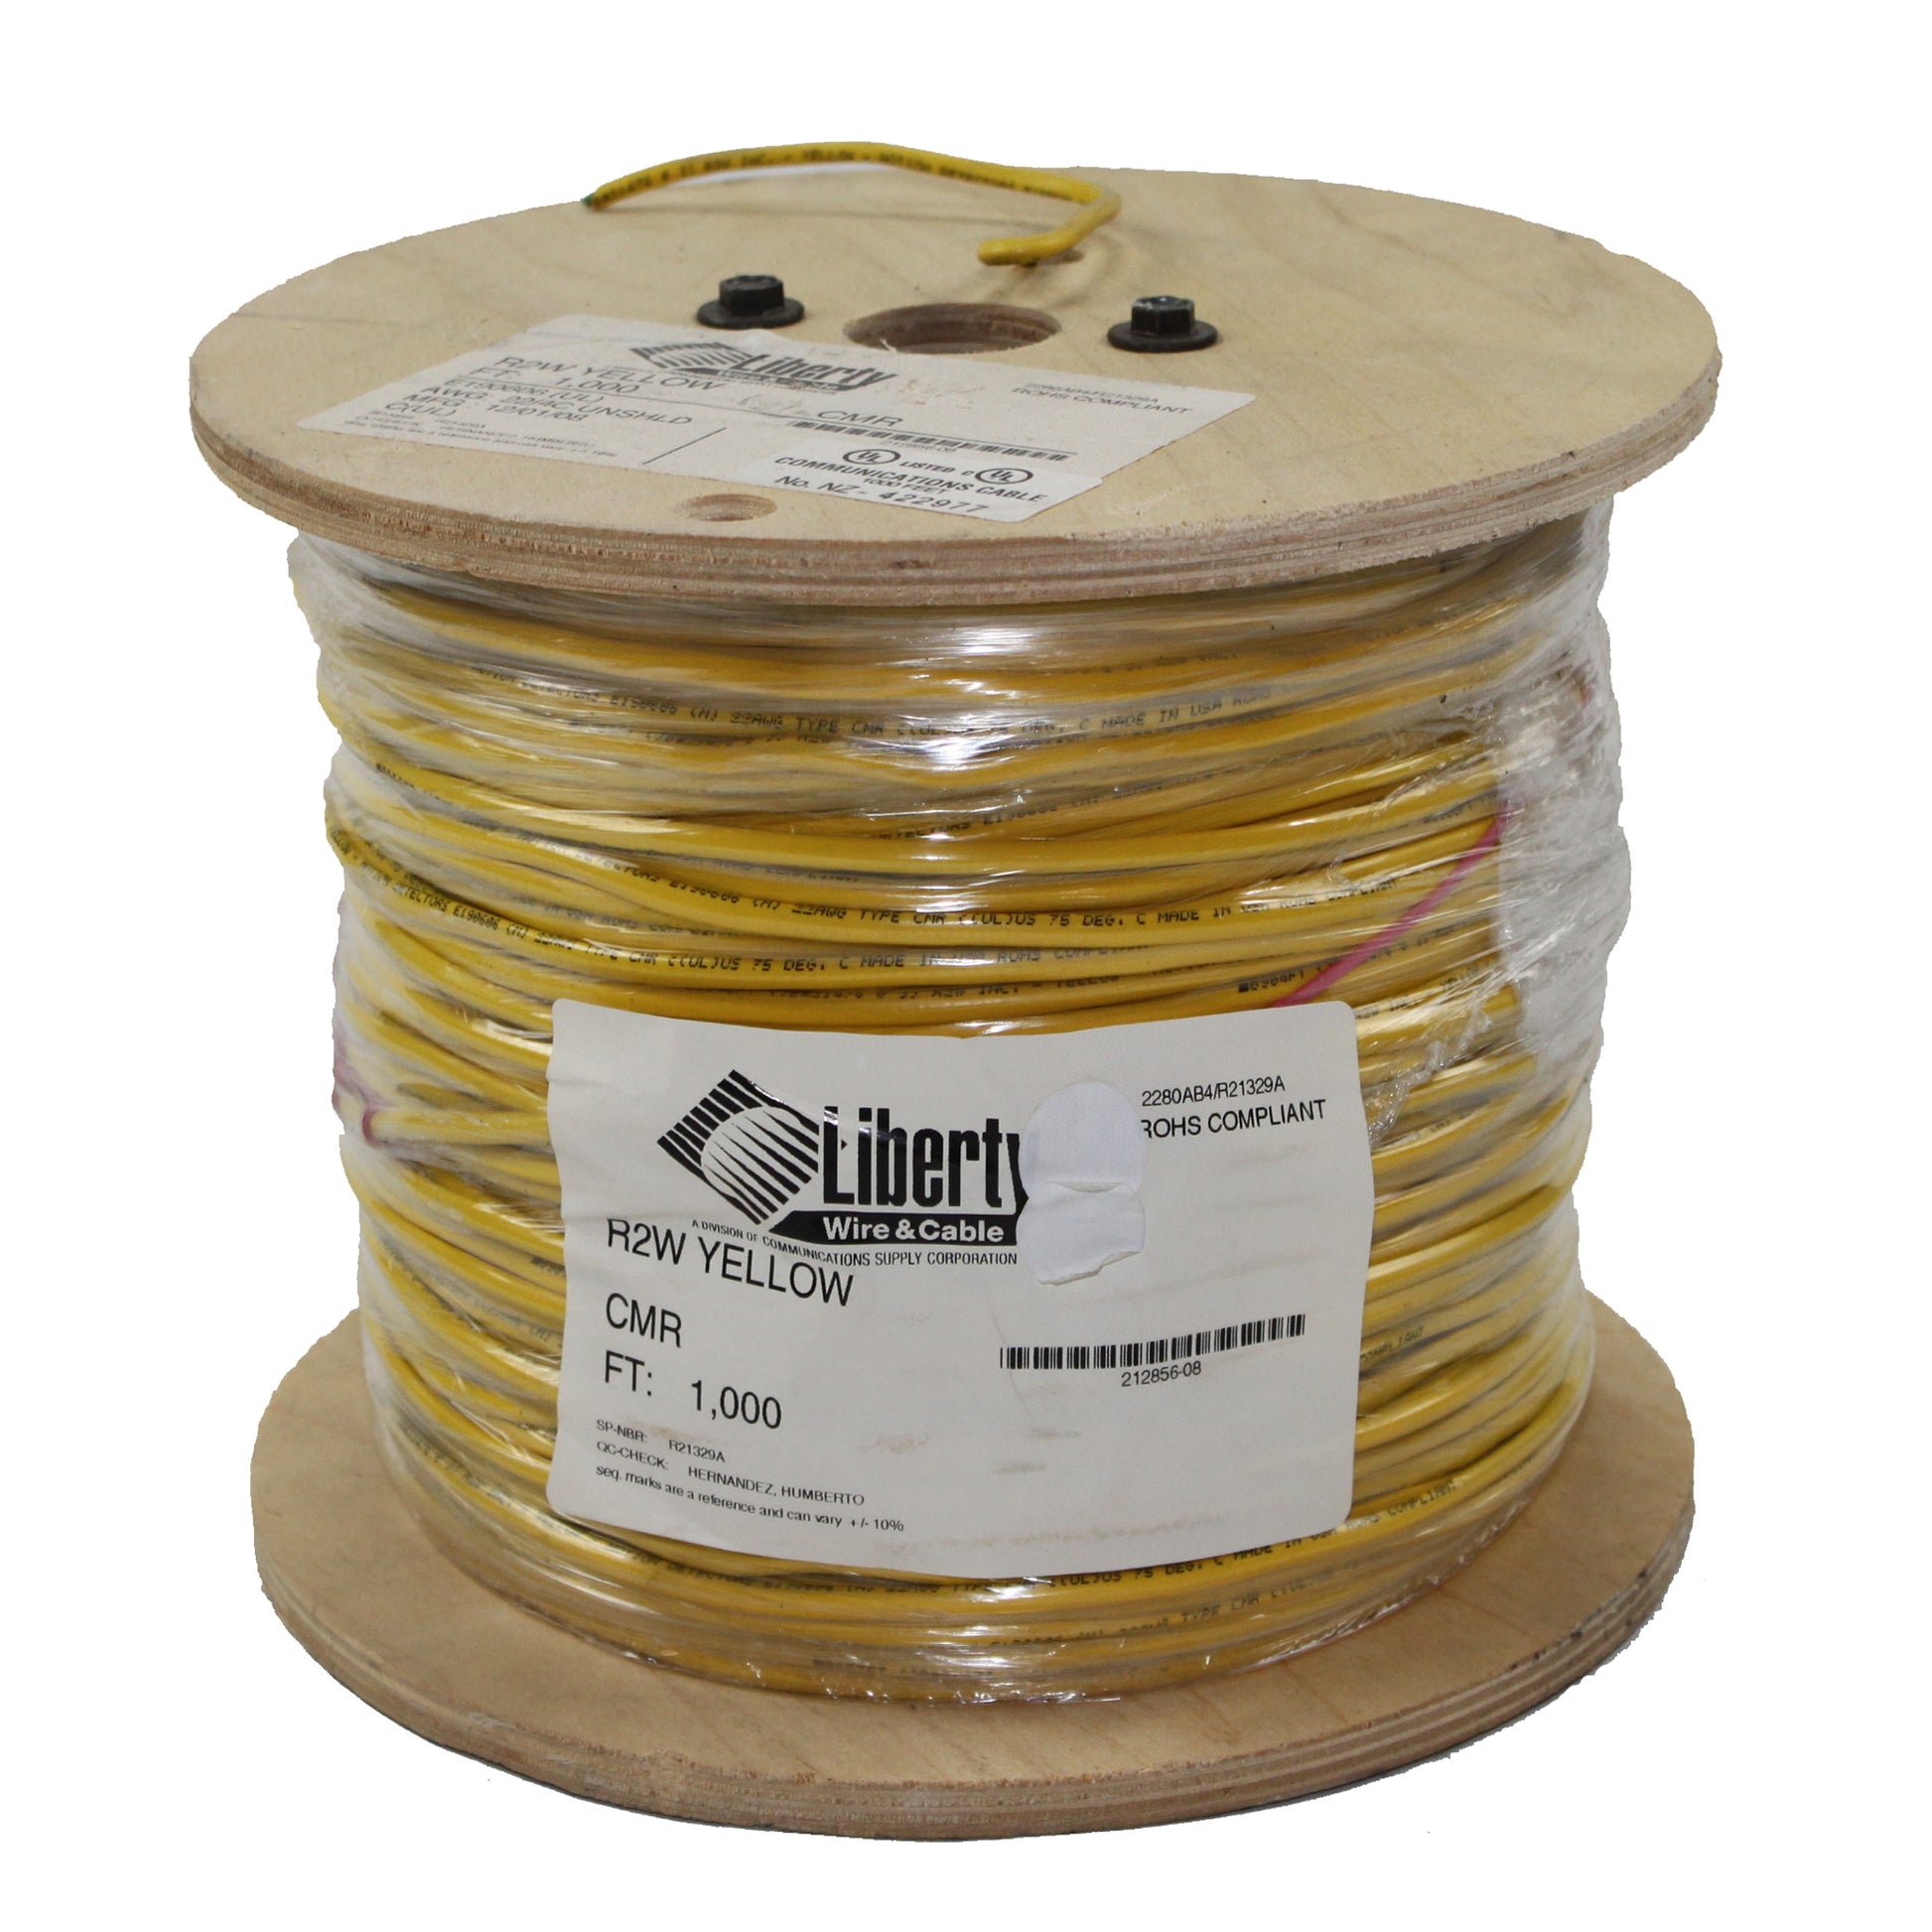 Liberty Wire & Cable 22/4-YEL